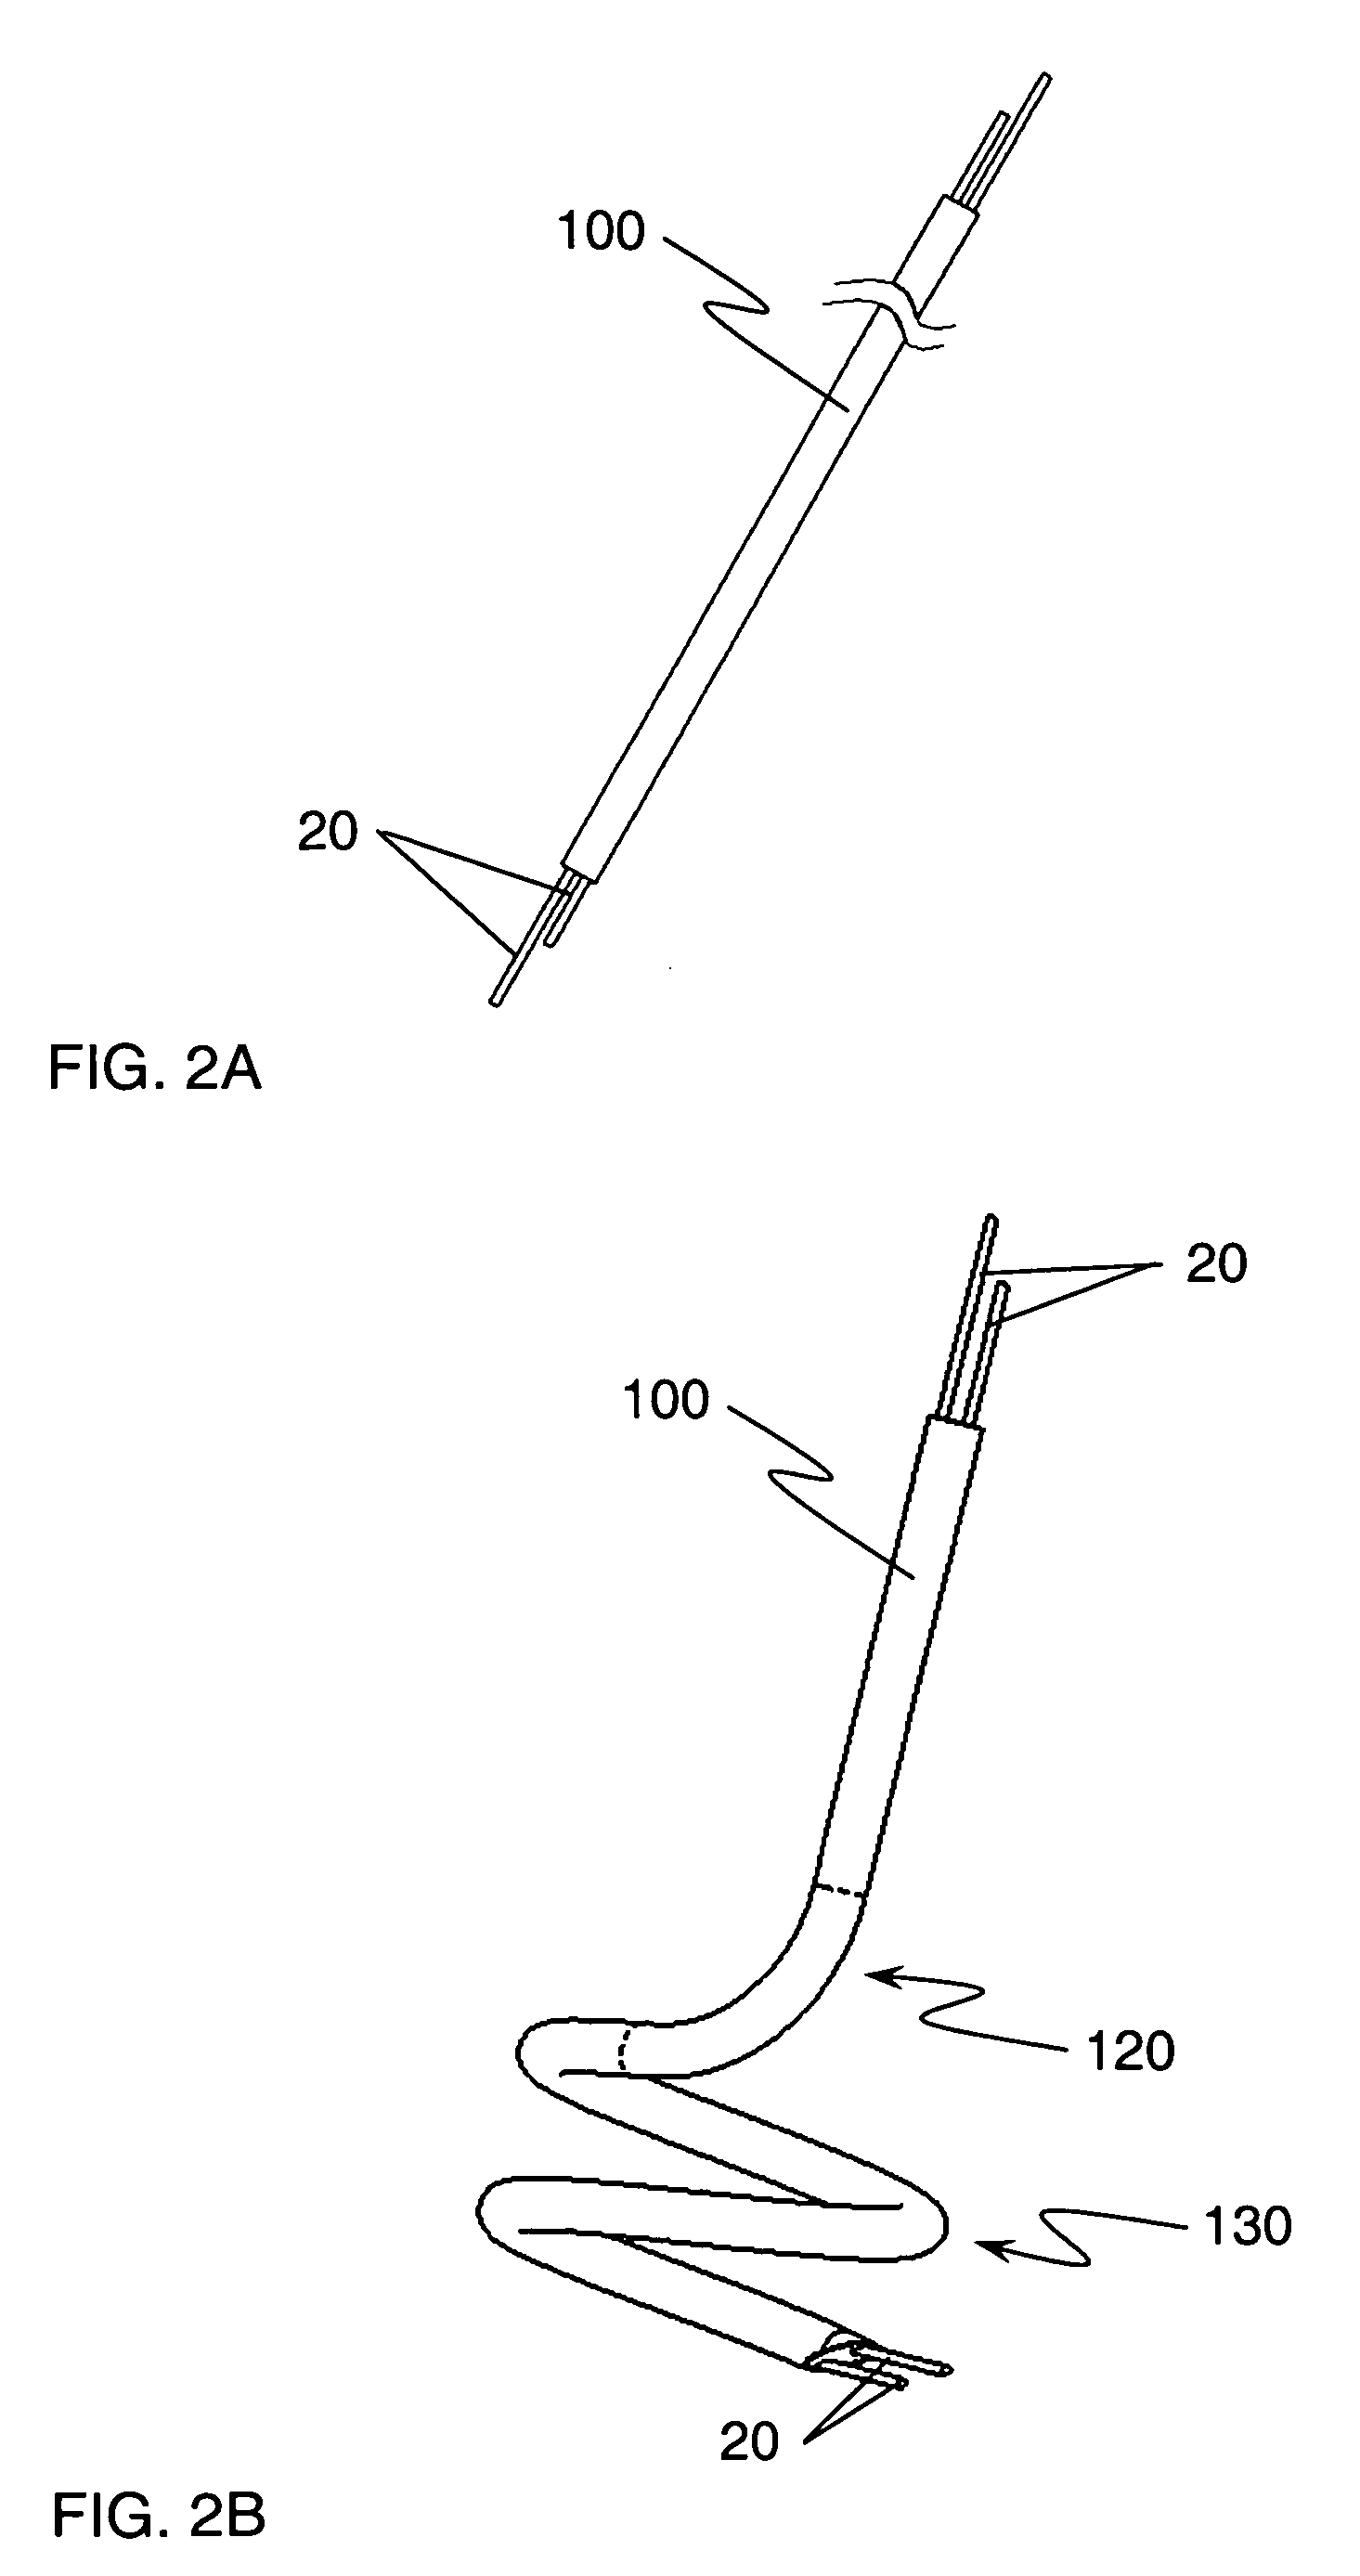 Curved needle assembly for subcutaneous light delivery